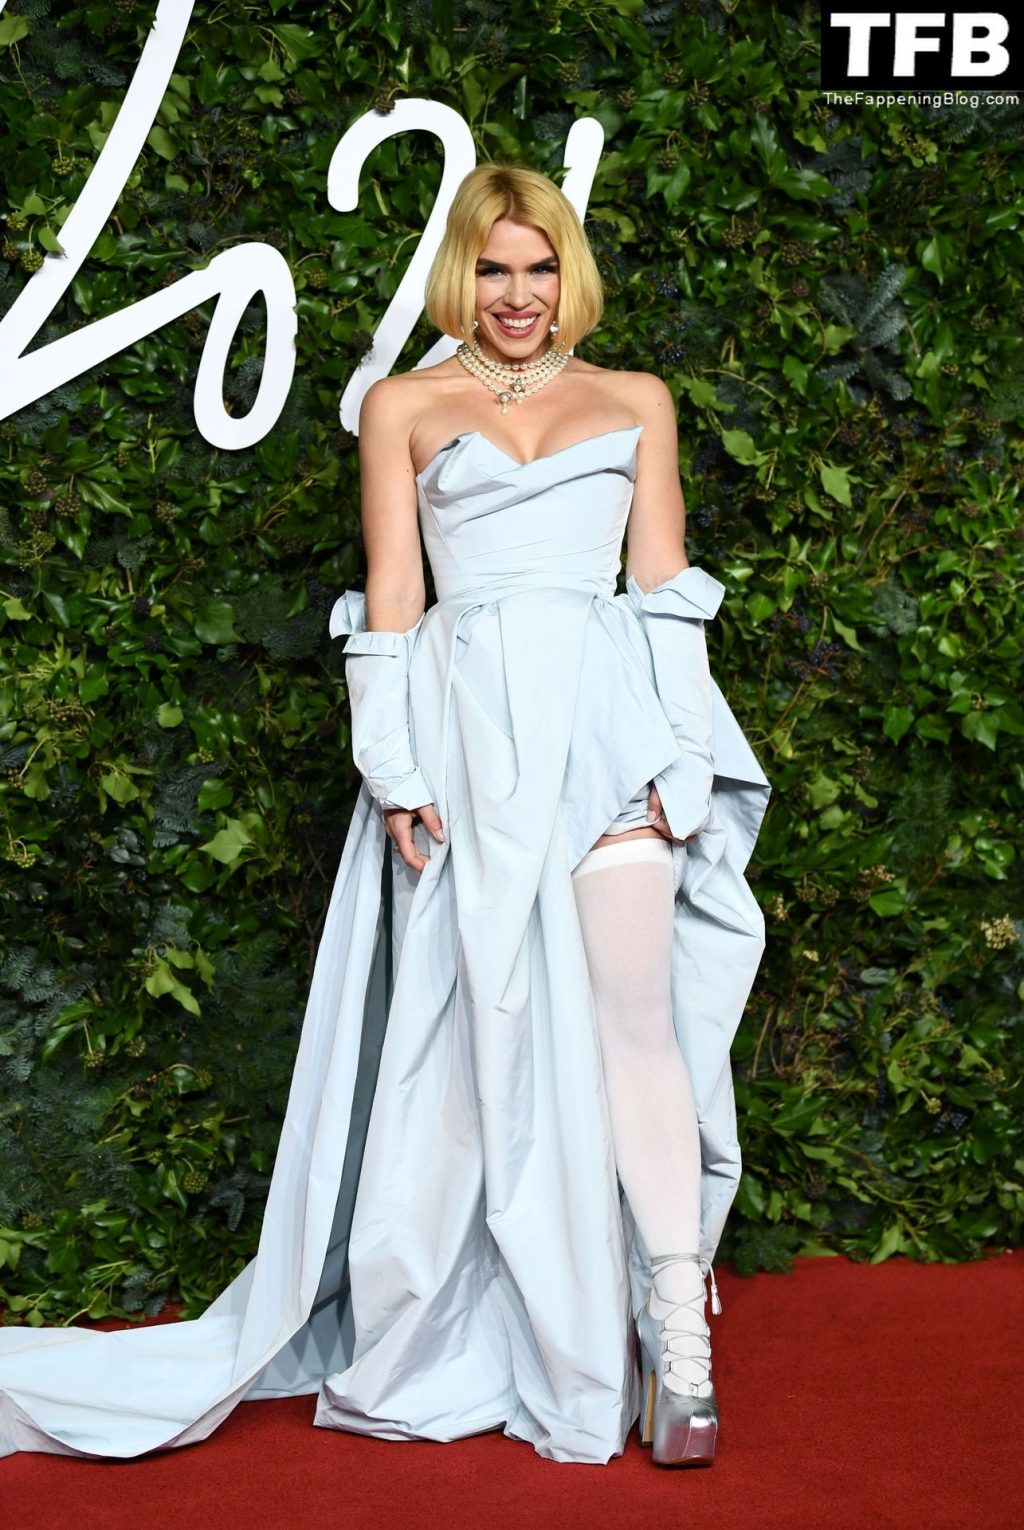 Billie Piper Puts On Busty Display at The Fashion Awards 2021 (33 Photos)